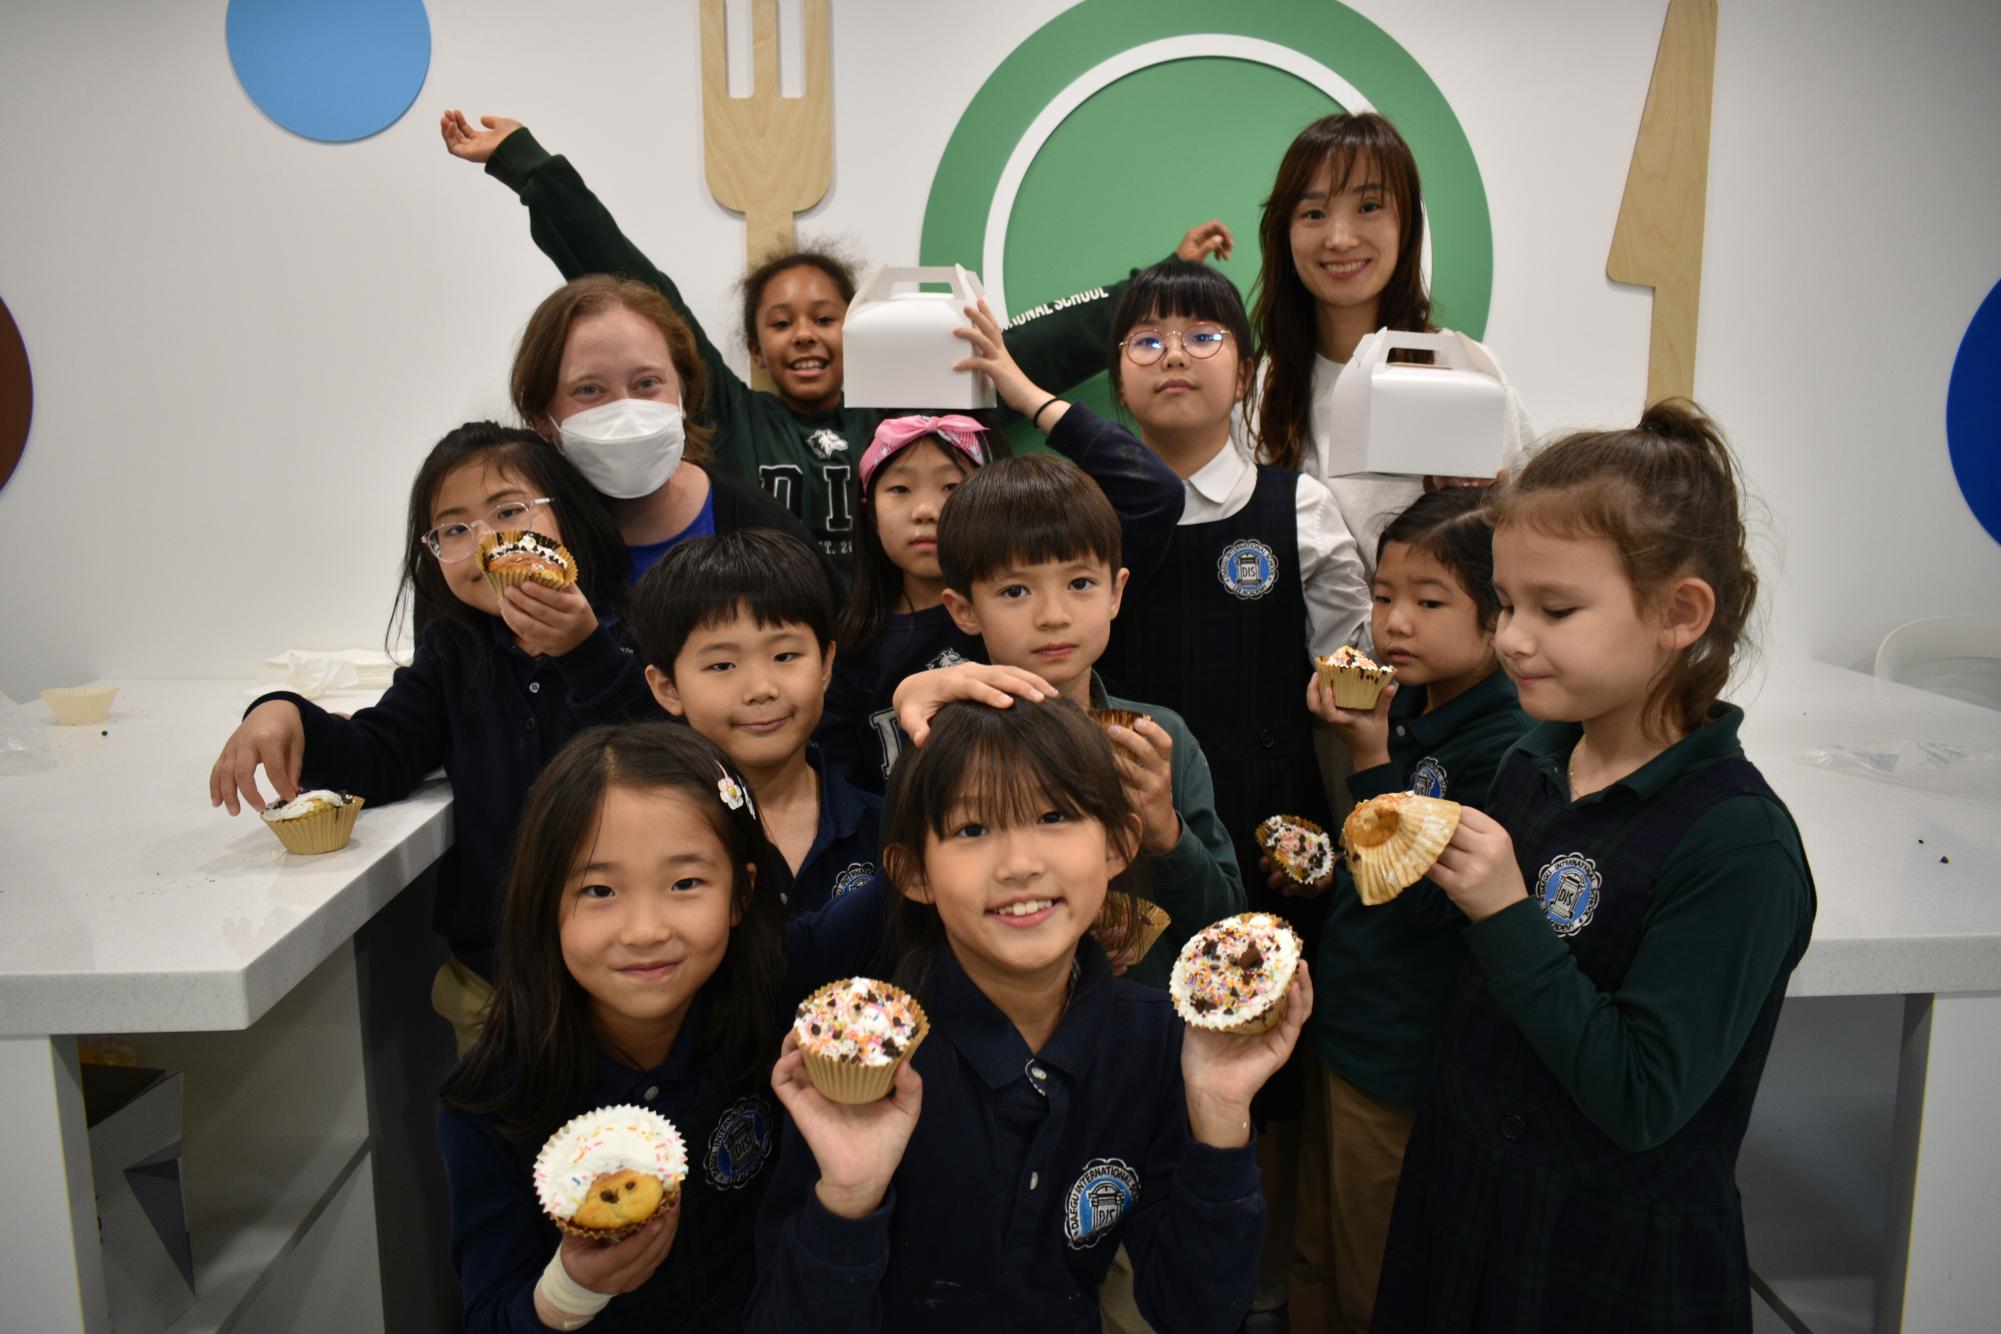 Mrs. Kim and Mrs. Morissette round up eager bakers to show off another day of successful delicacies. The young chefs fill their mouths with cupcakes and bring the leftovers home for friends and family. 
